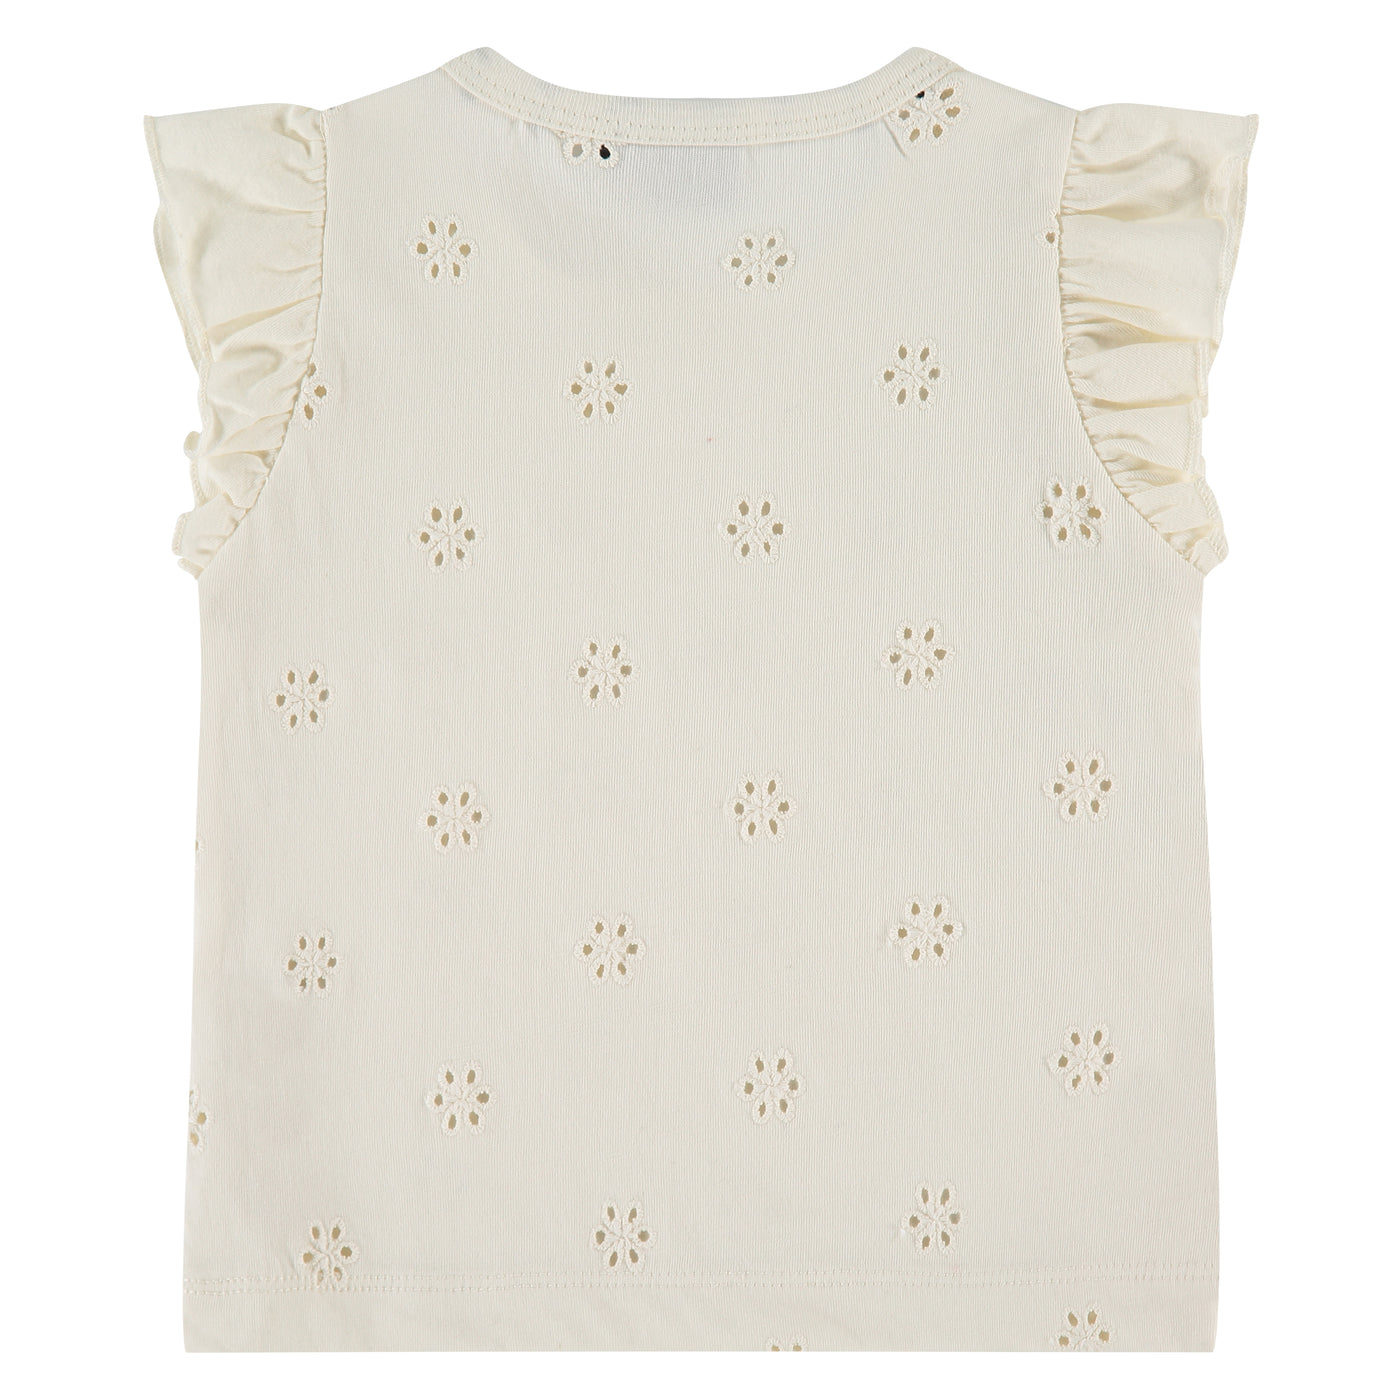 Eyelet Ruffle Top in Ivory